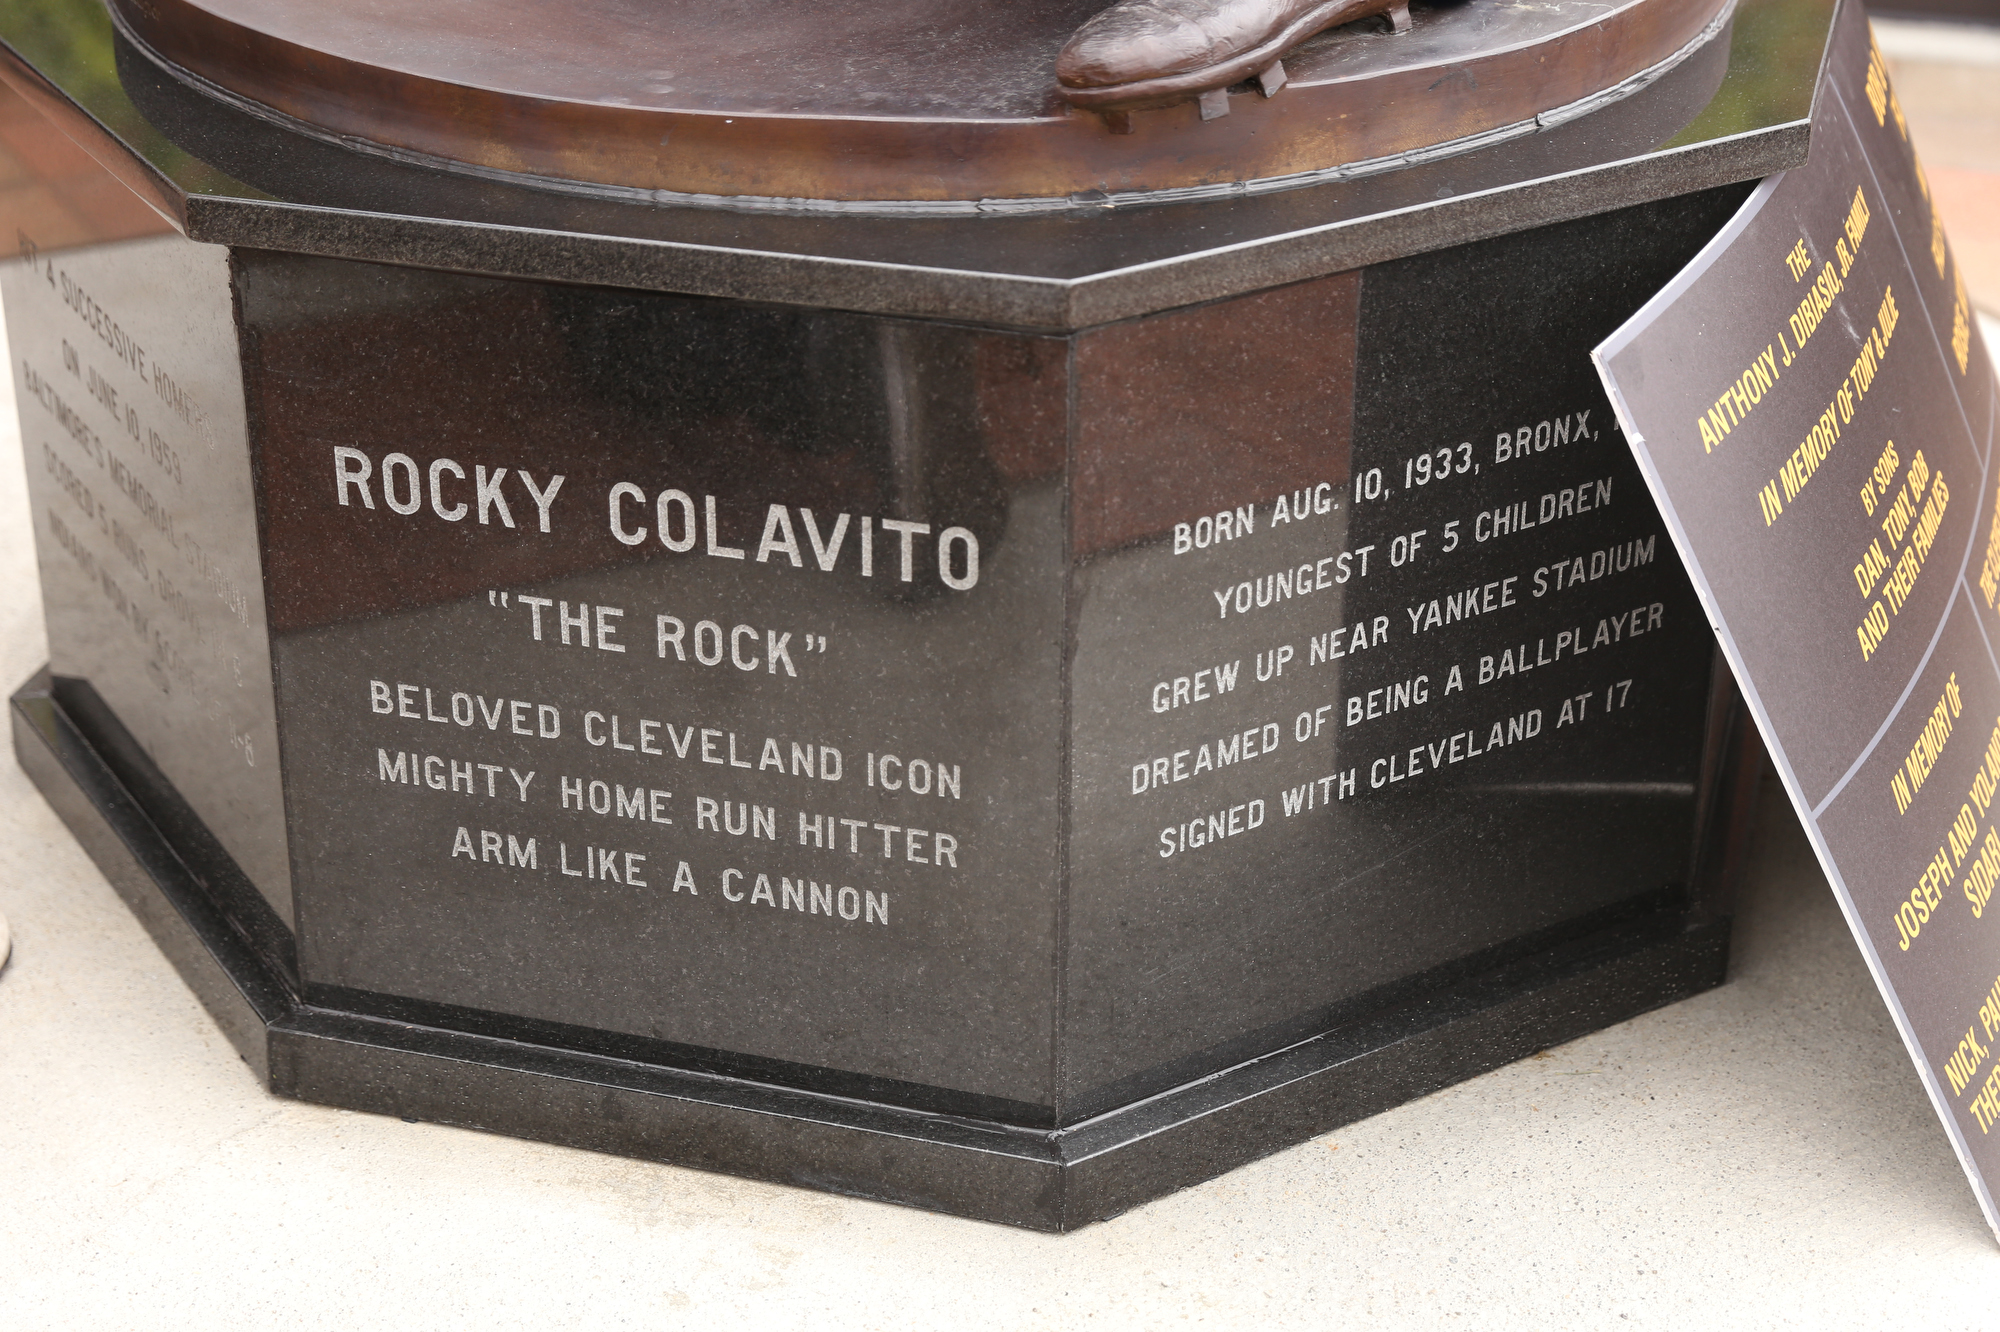 Cleveland Indians legend Rocky Colavito honored with statue in Little Italy  